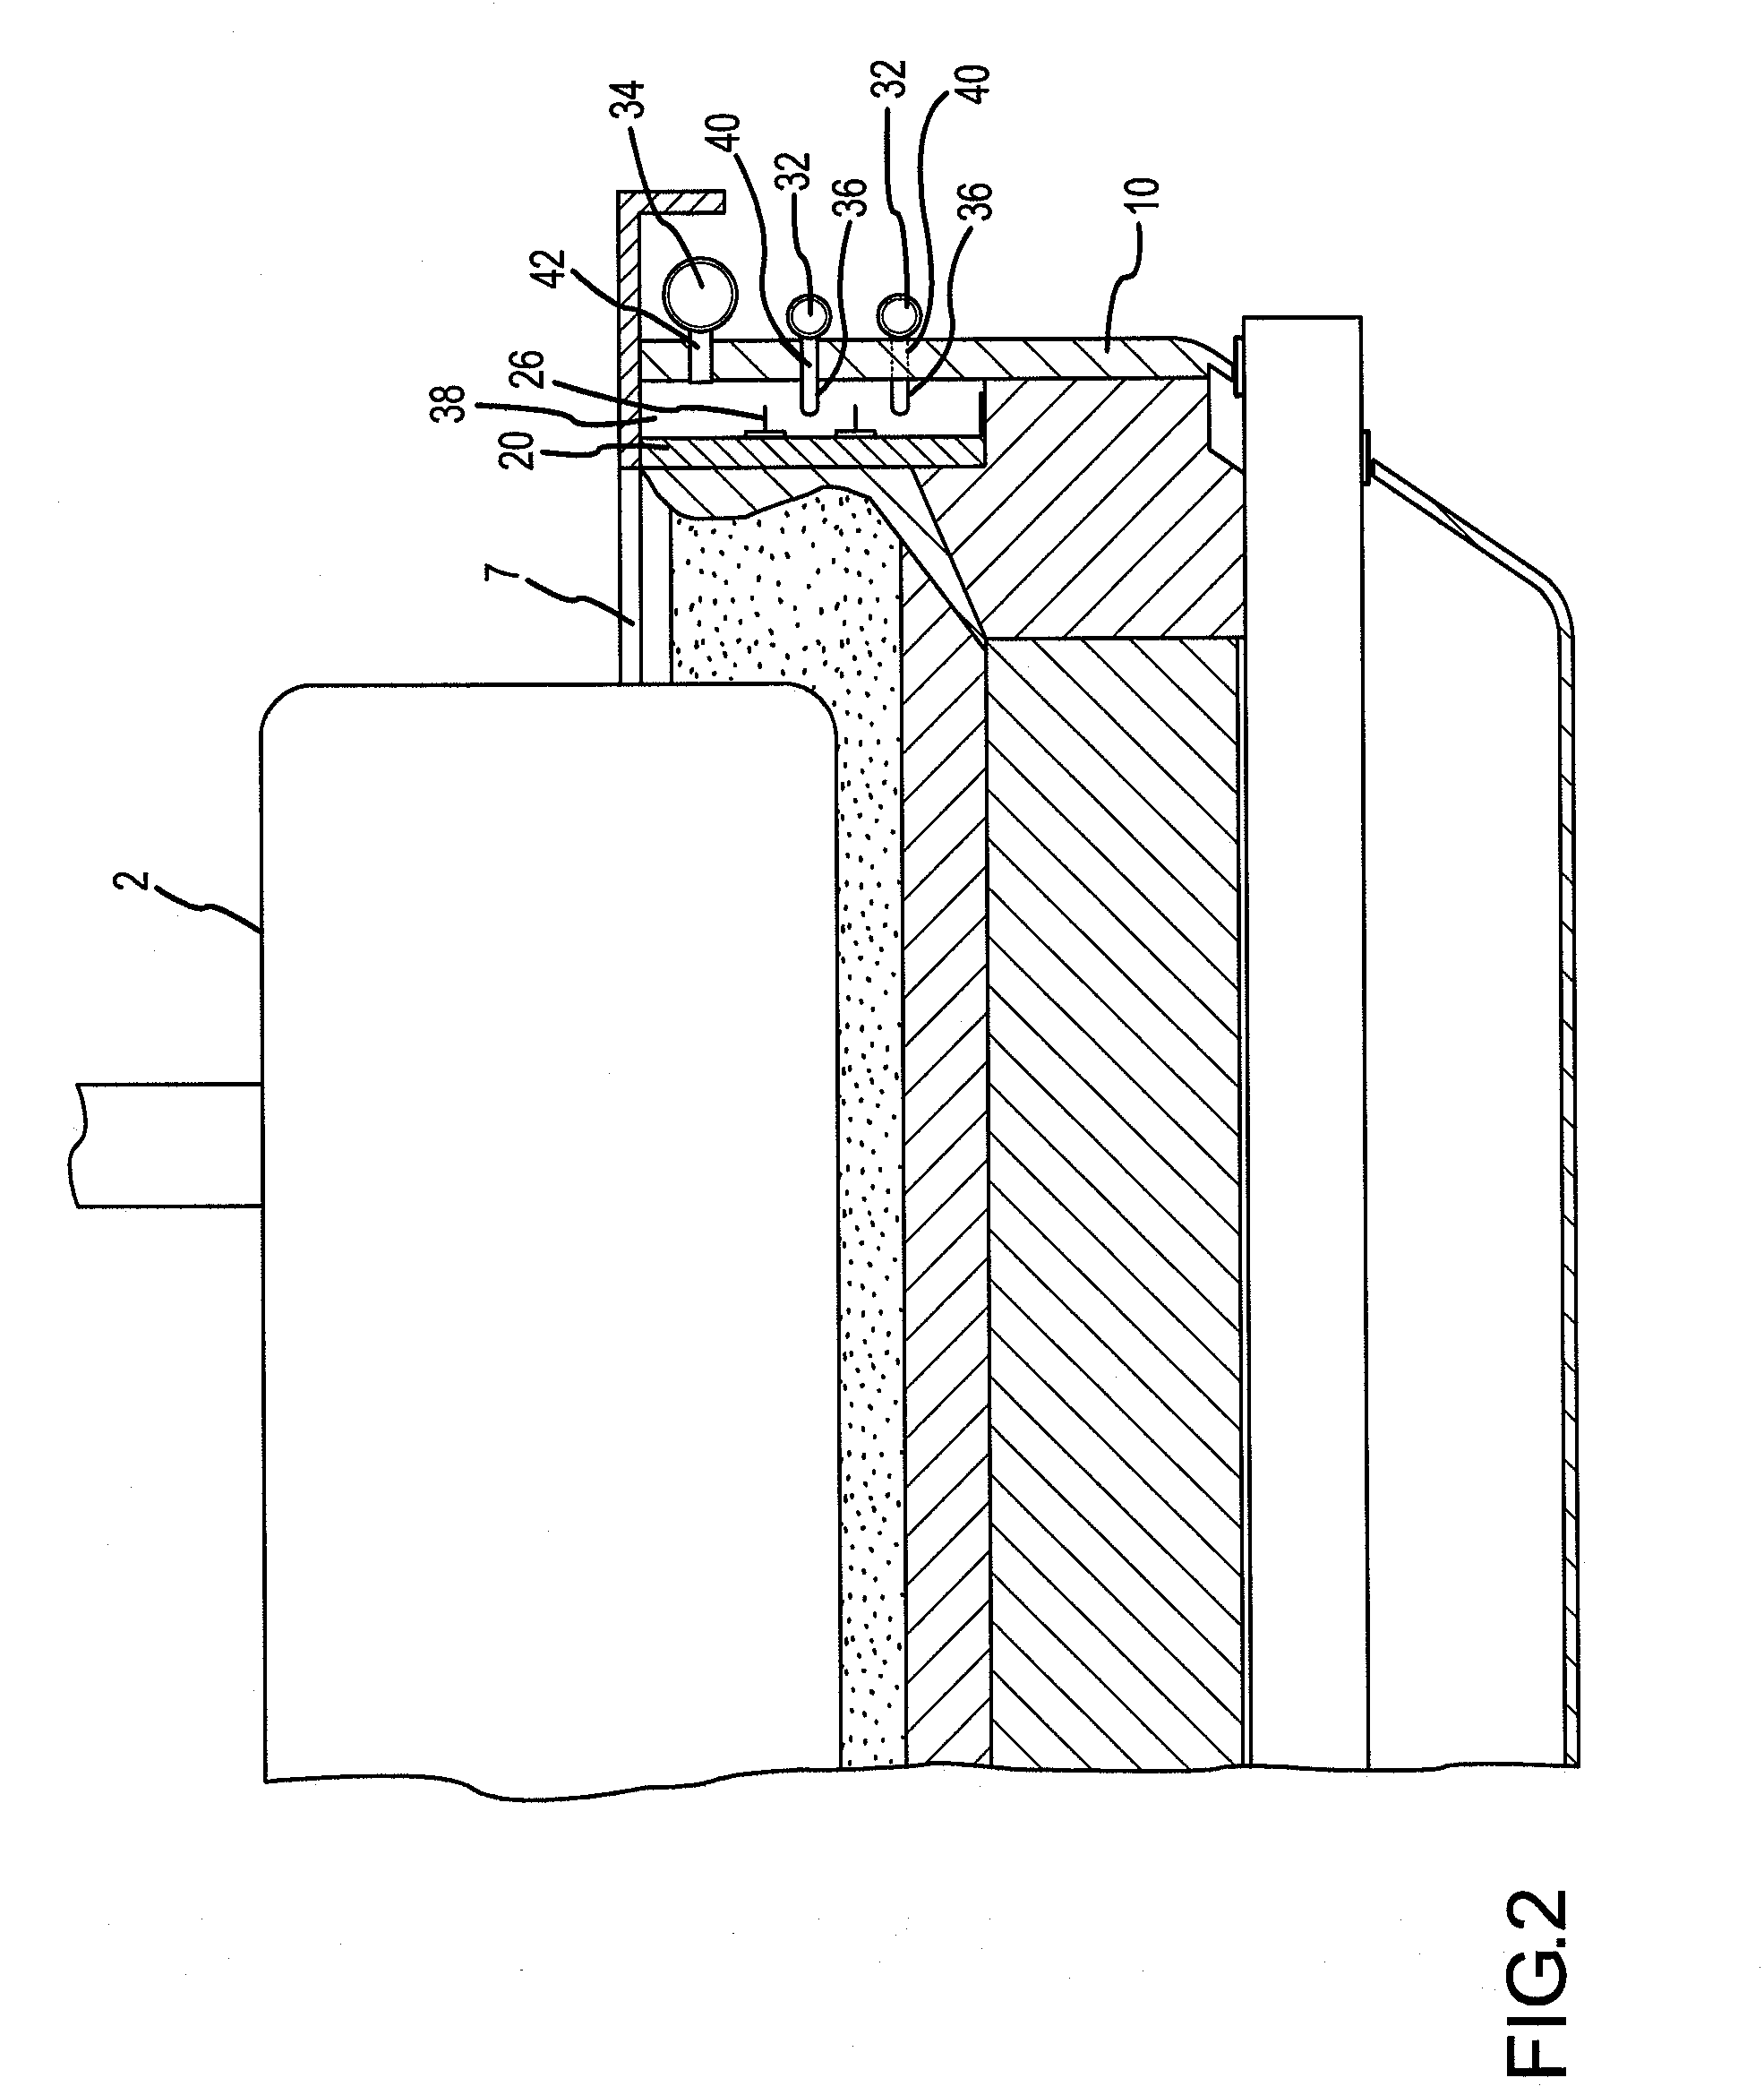 Sidewall temperature control systems and methods and improved electrolysis cells relating to same